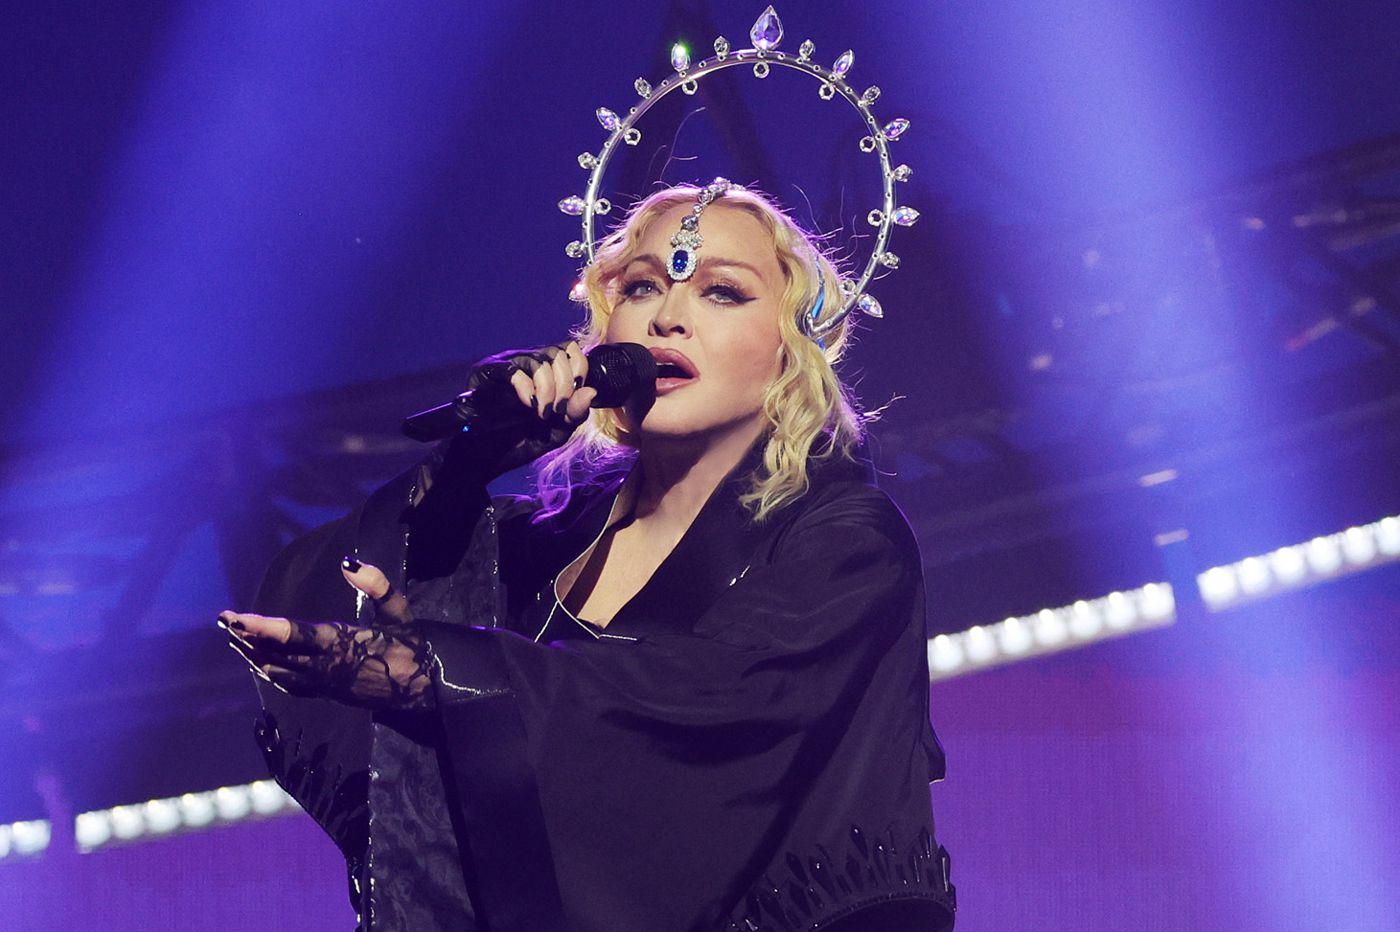 Madonna Subs in 'Express Yourself' on Her Celebration Tour and Says She